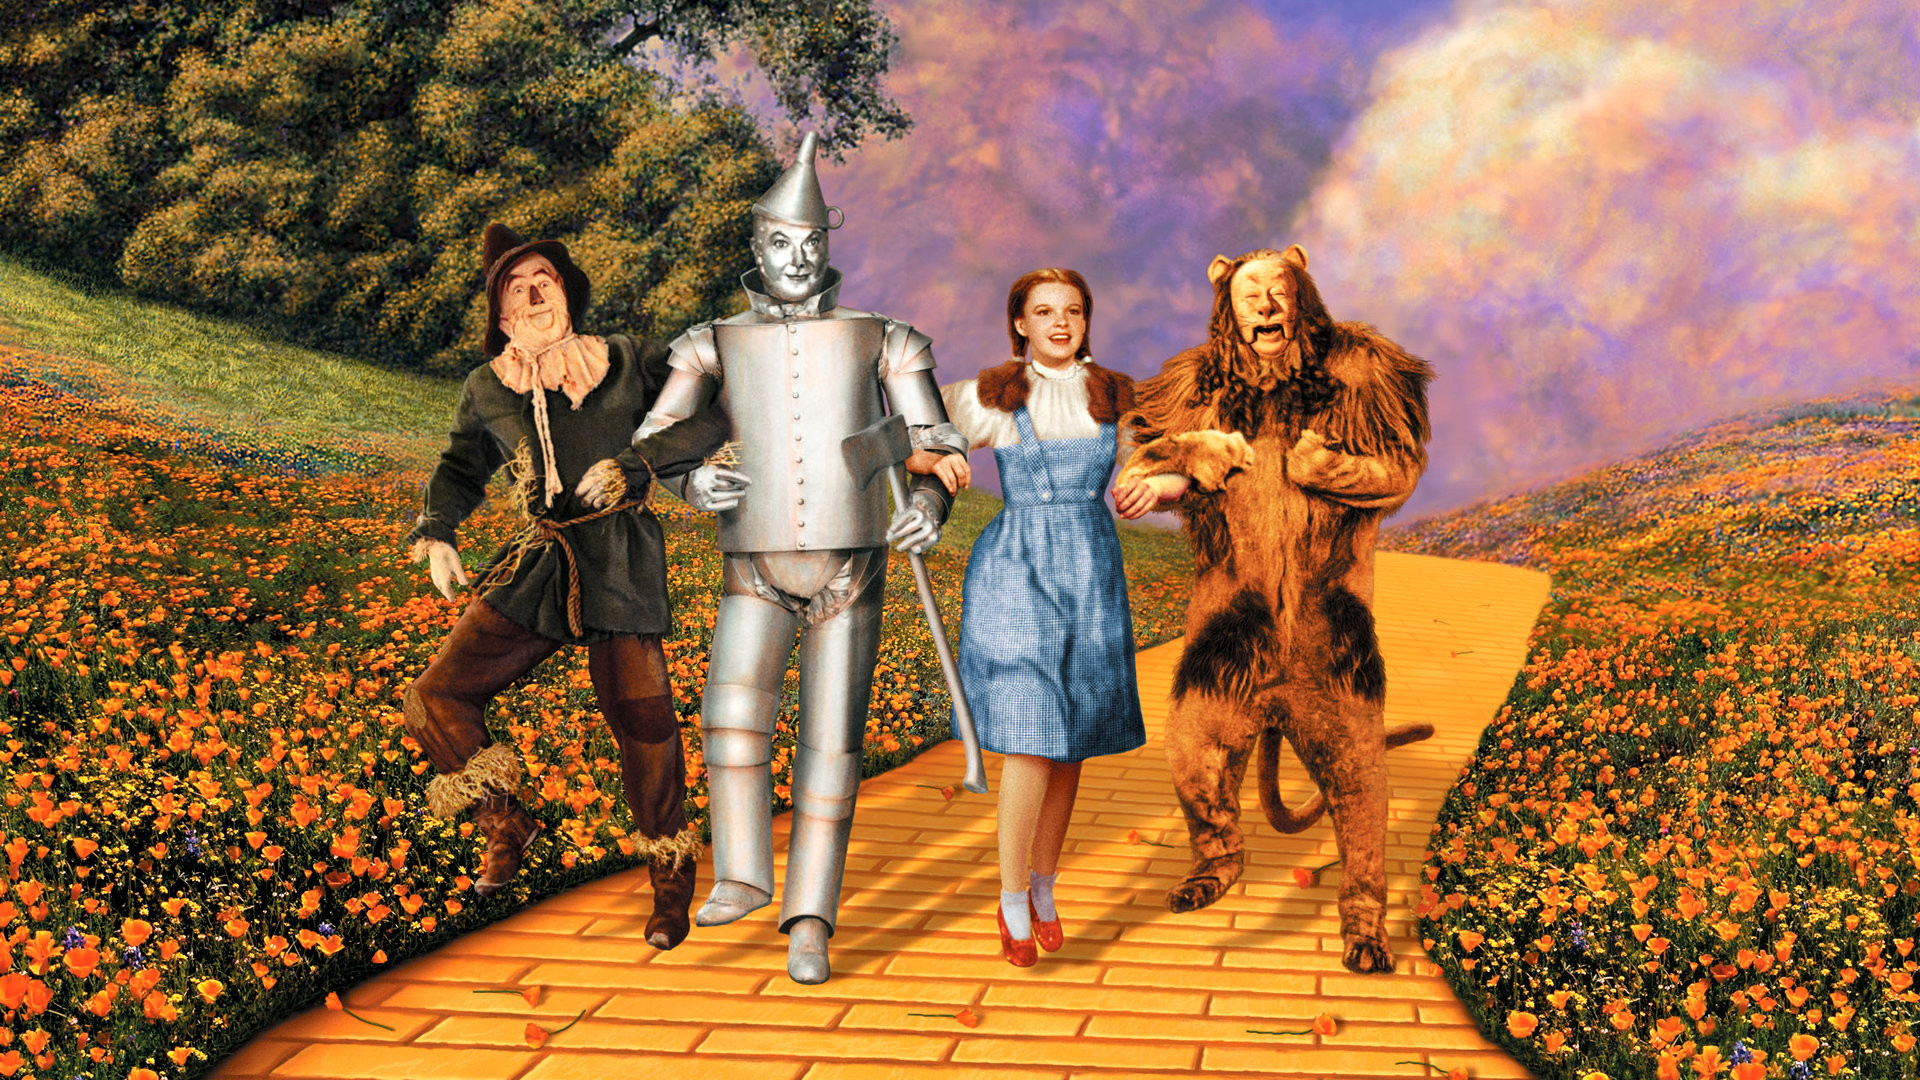 The Yellow Brick Road: An Executive's Guide to Digital Transformation